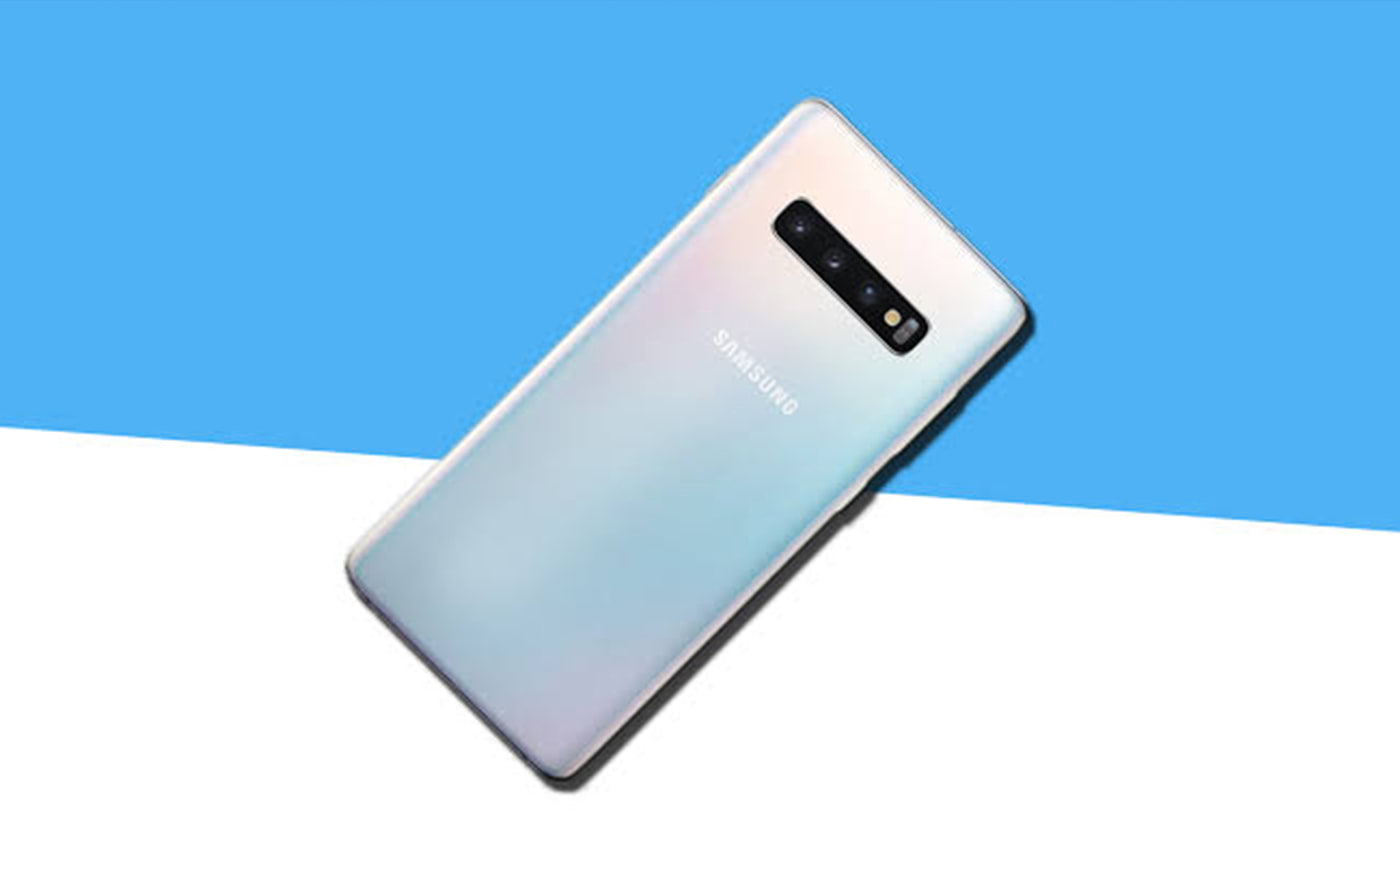 March security patch reaches Galaxy S10 line